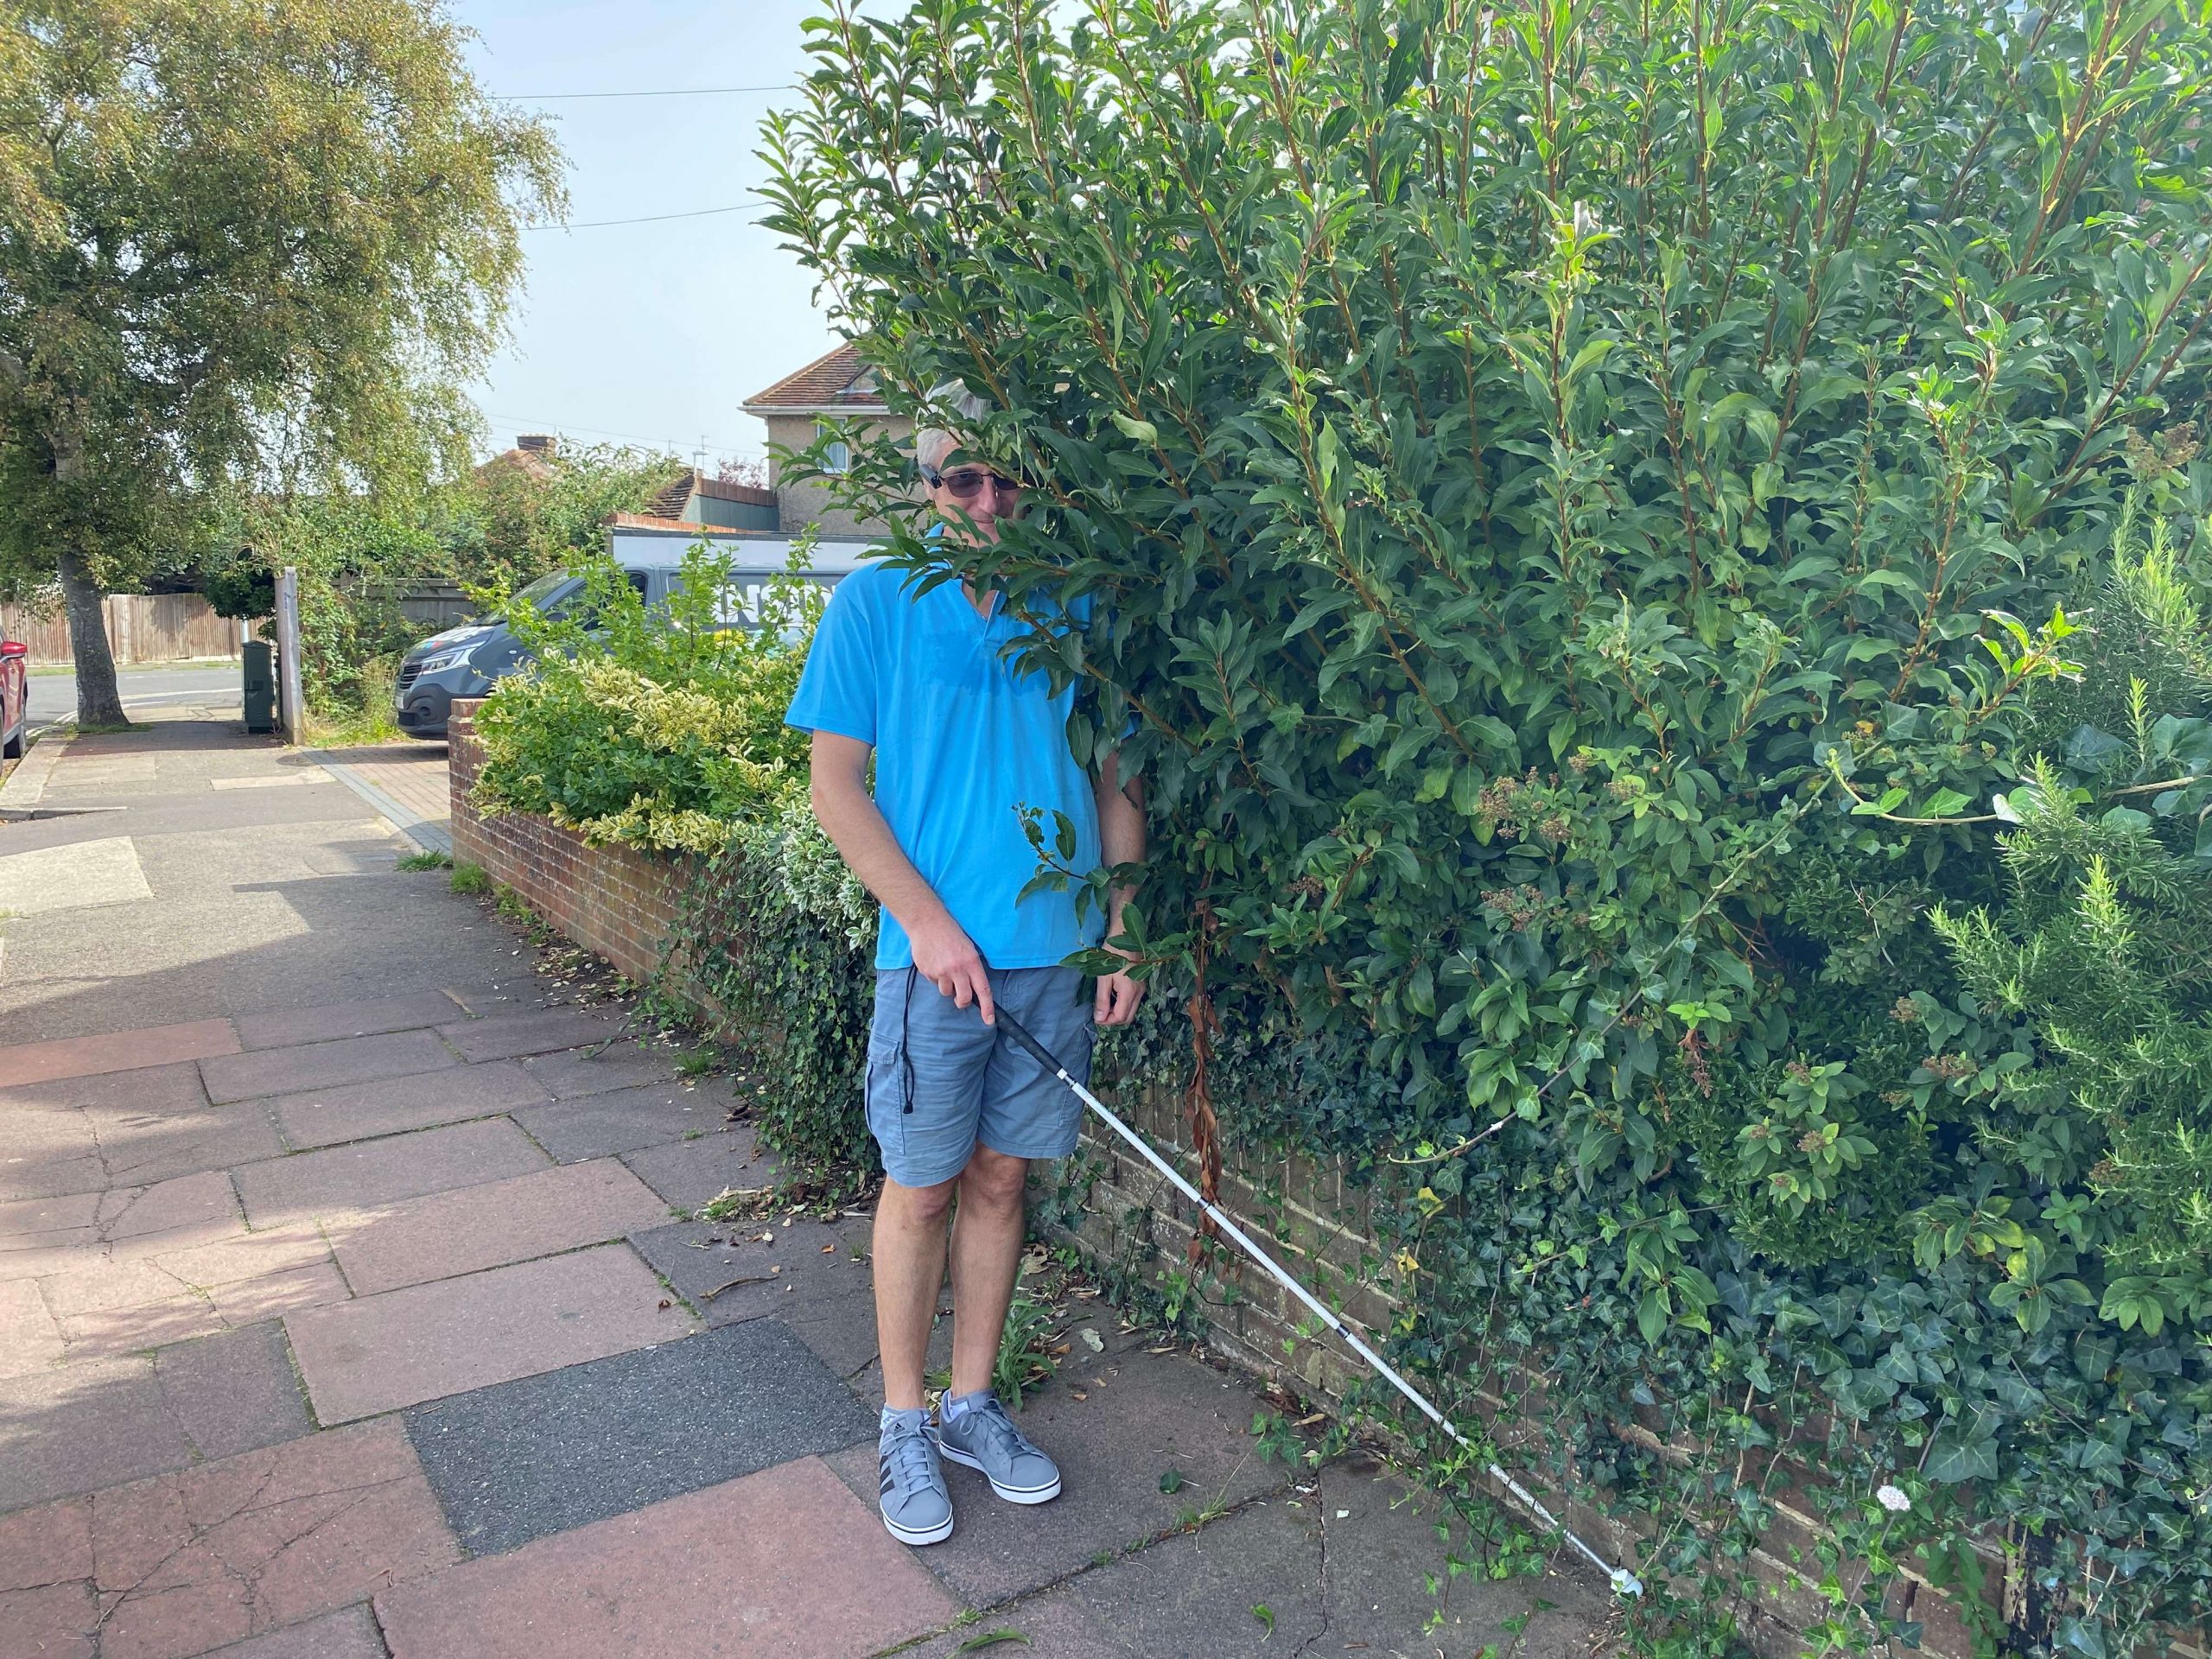 West Sussex SLC member, Clinton is shown walking with his long cane, into a large garden hedge which is protruding onto the pavement.